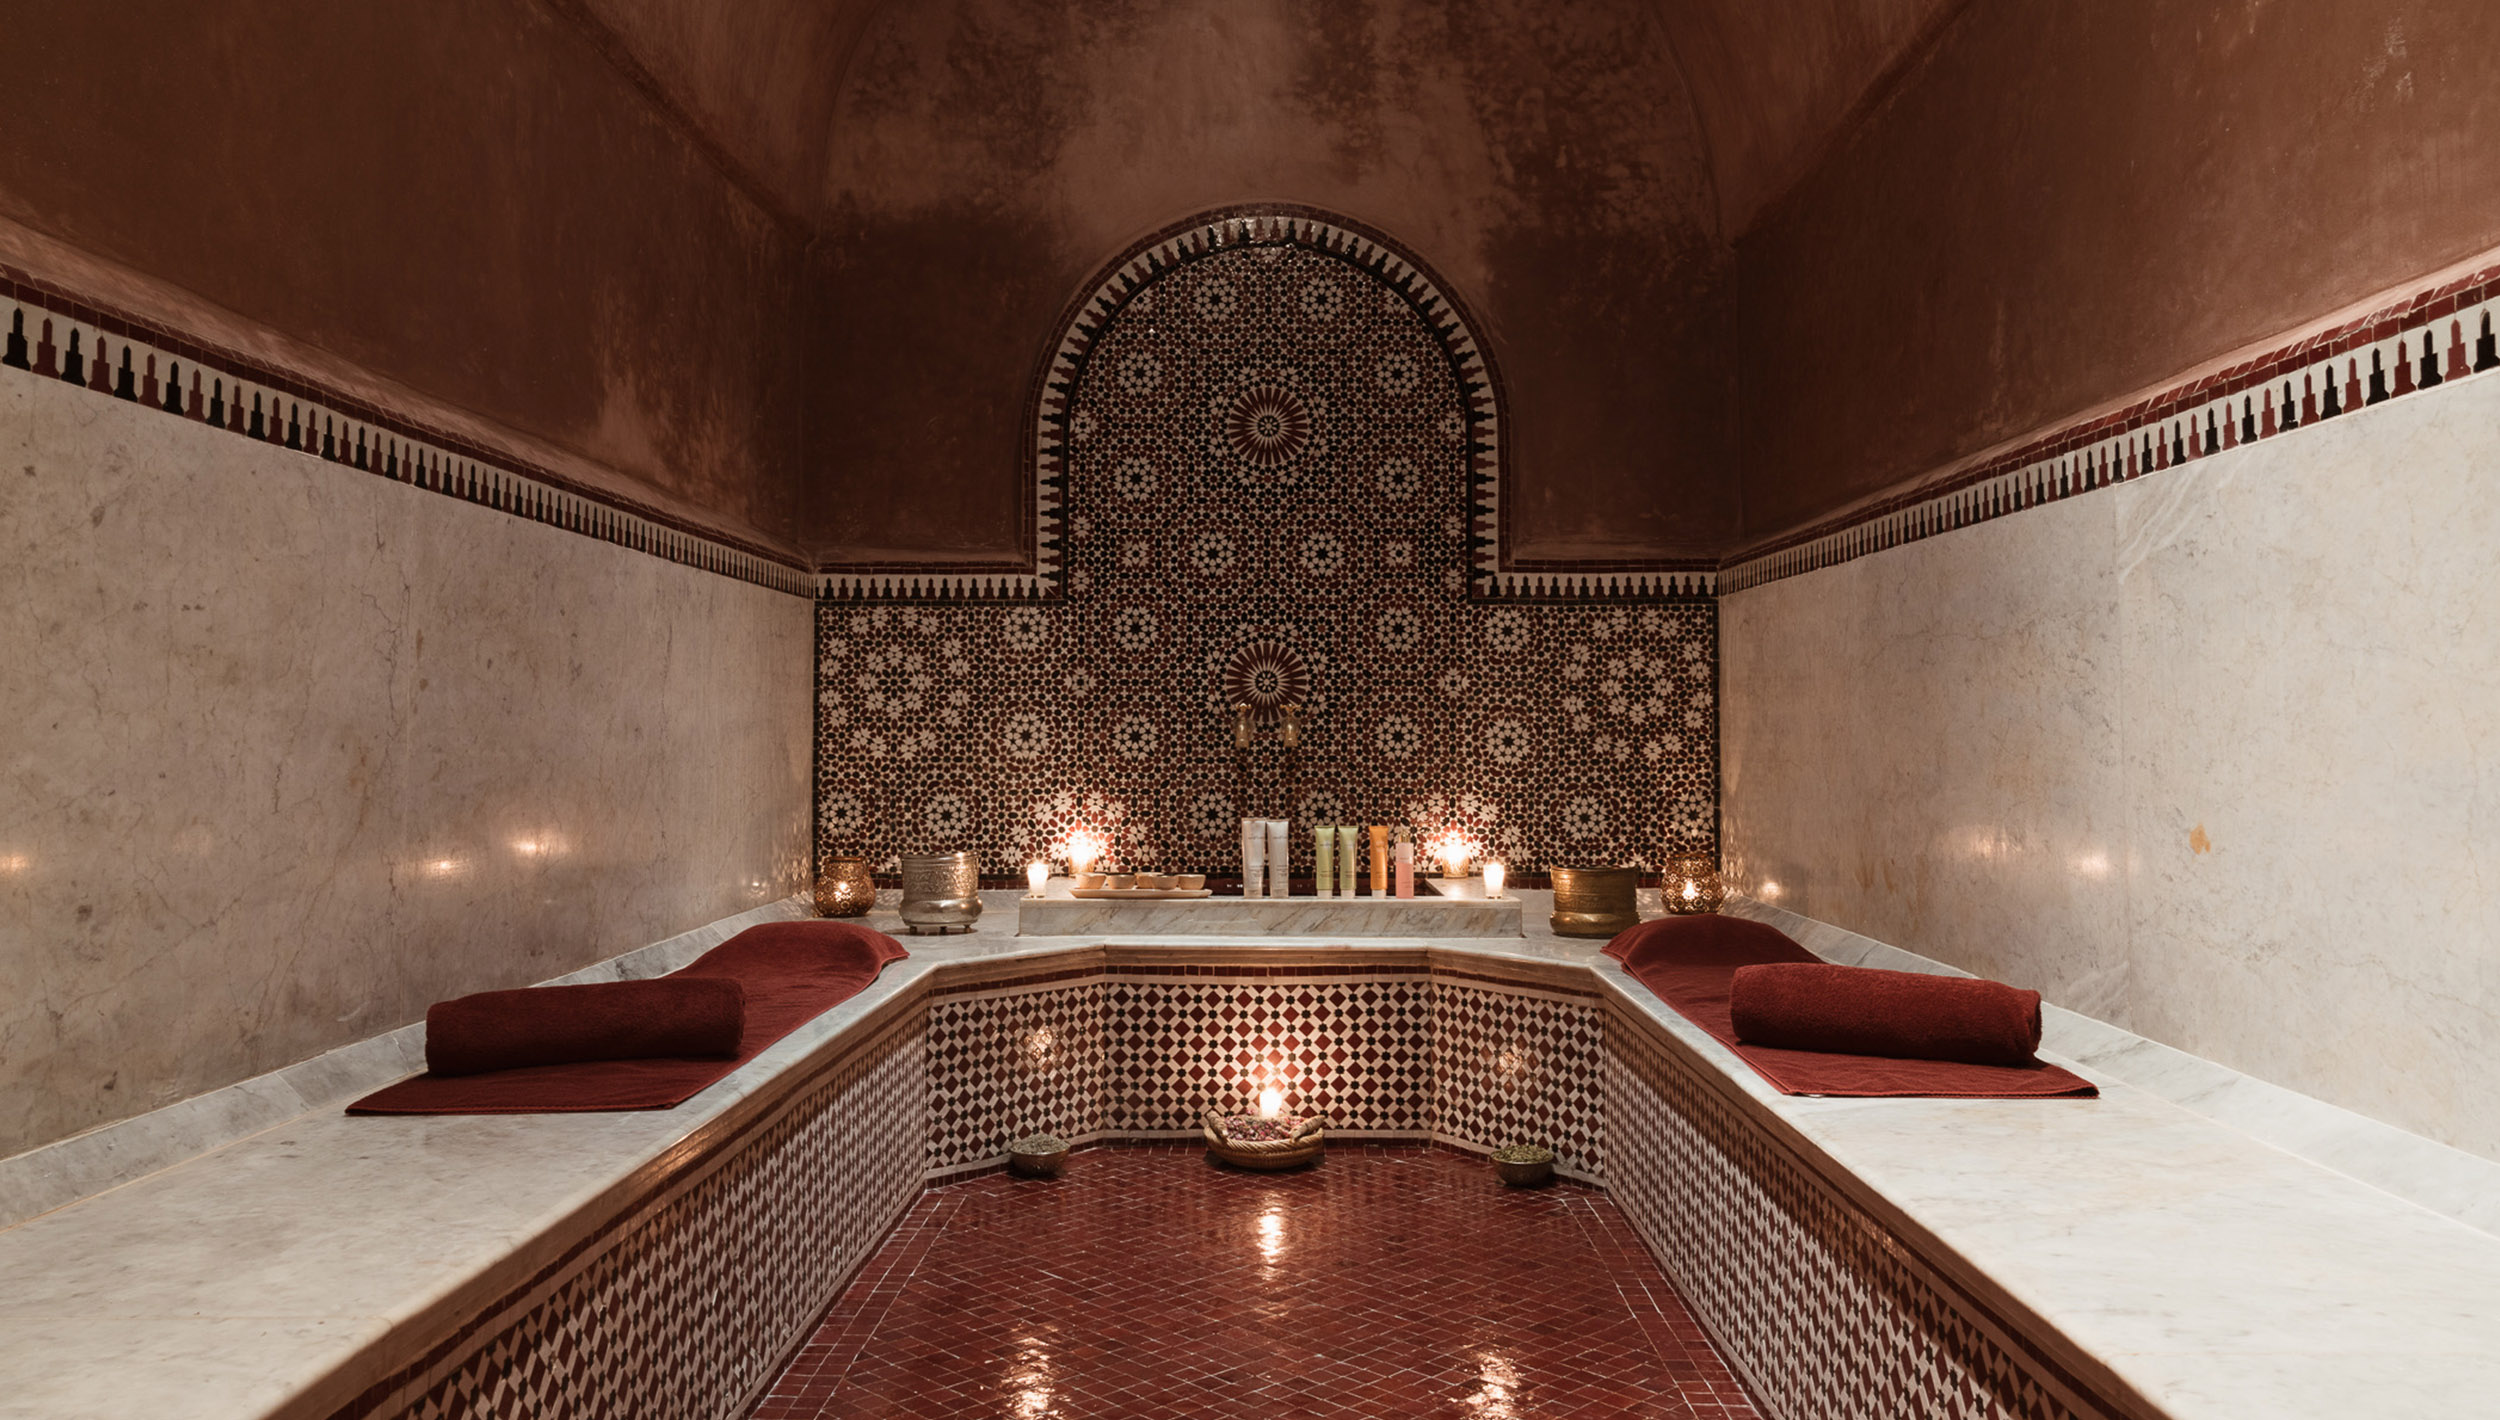 Designs inspired by Arab culture and art in our Chenot Spa Marrkech facilities